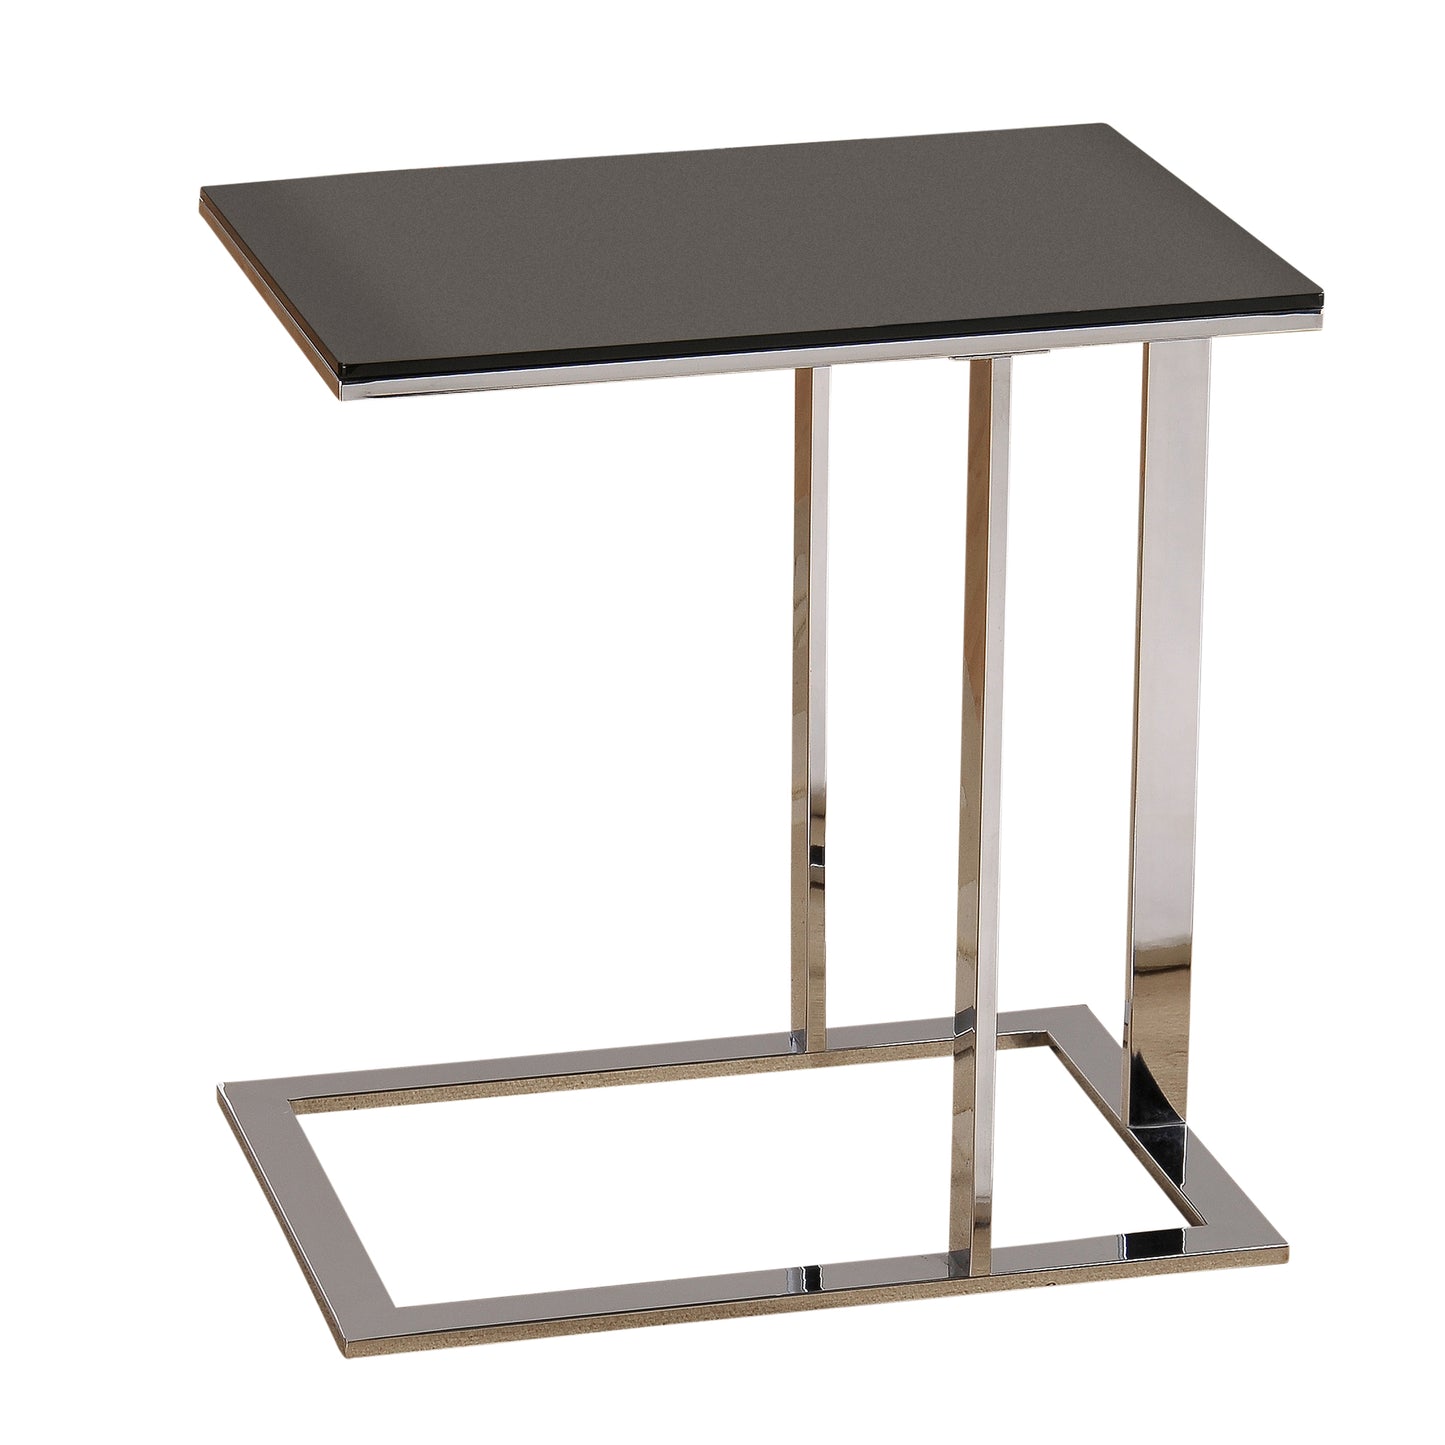 ACCENT TABLE - CHROME/BLACK - METAL/GLASS